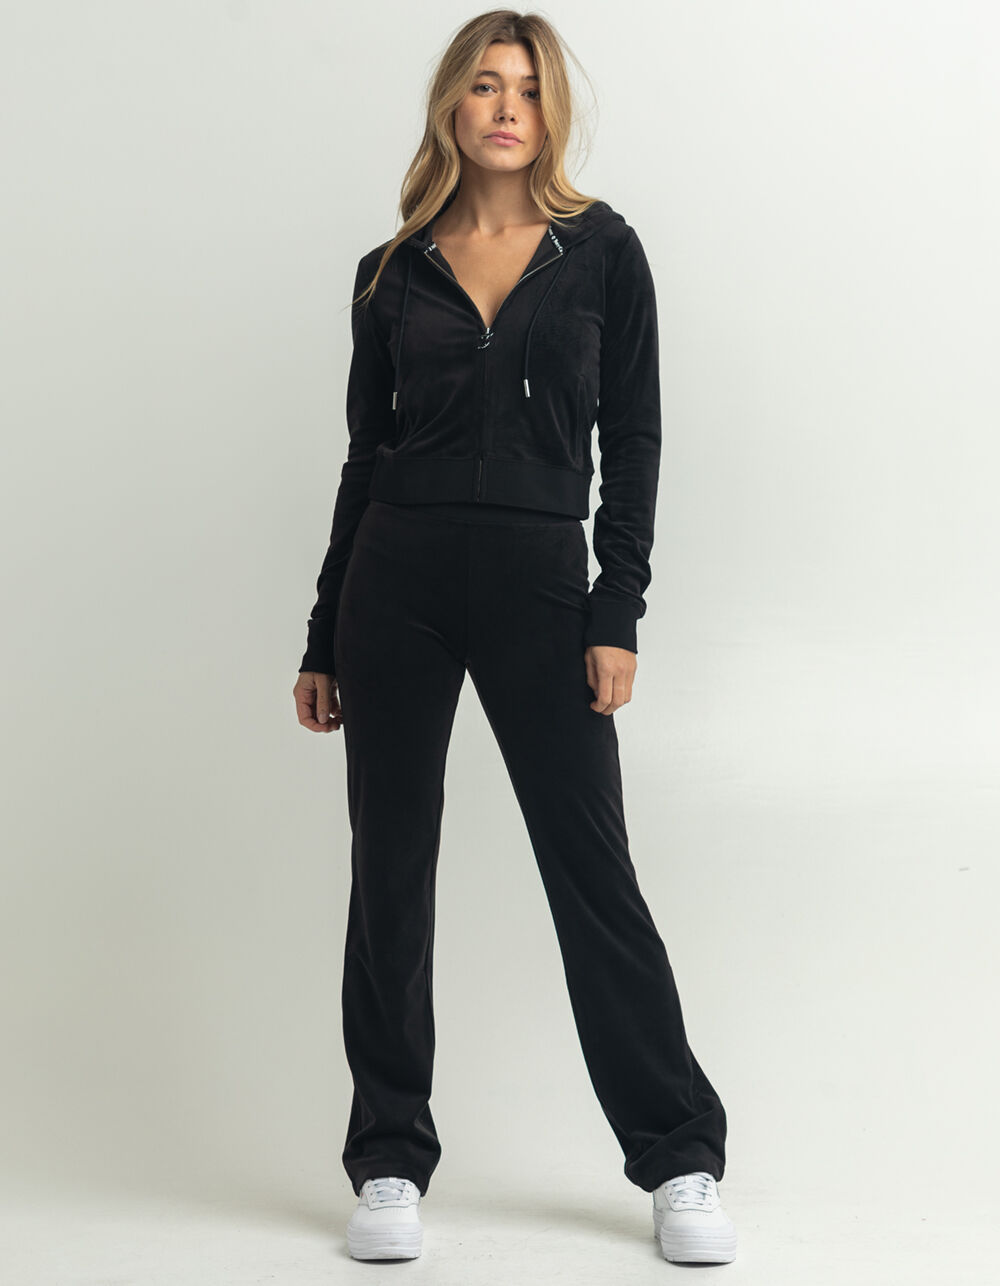 JUICY COUTURE Womens Embellished Velour Pant - BLACK | Tillys